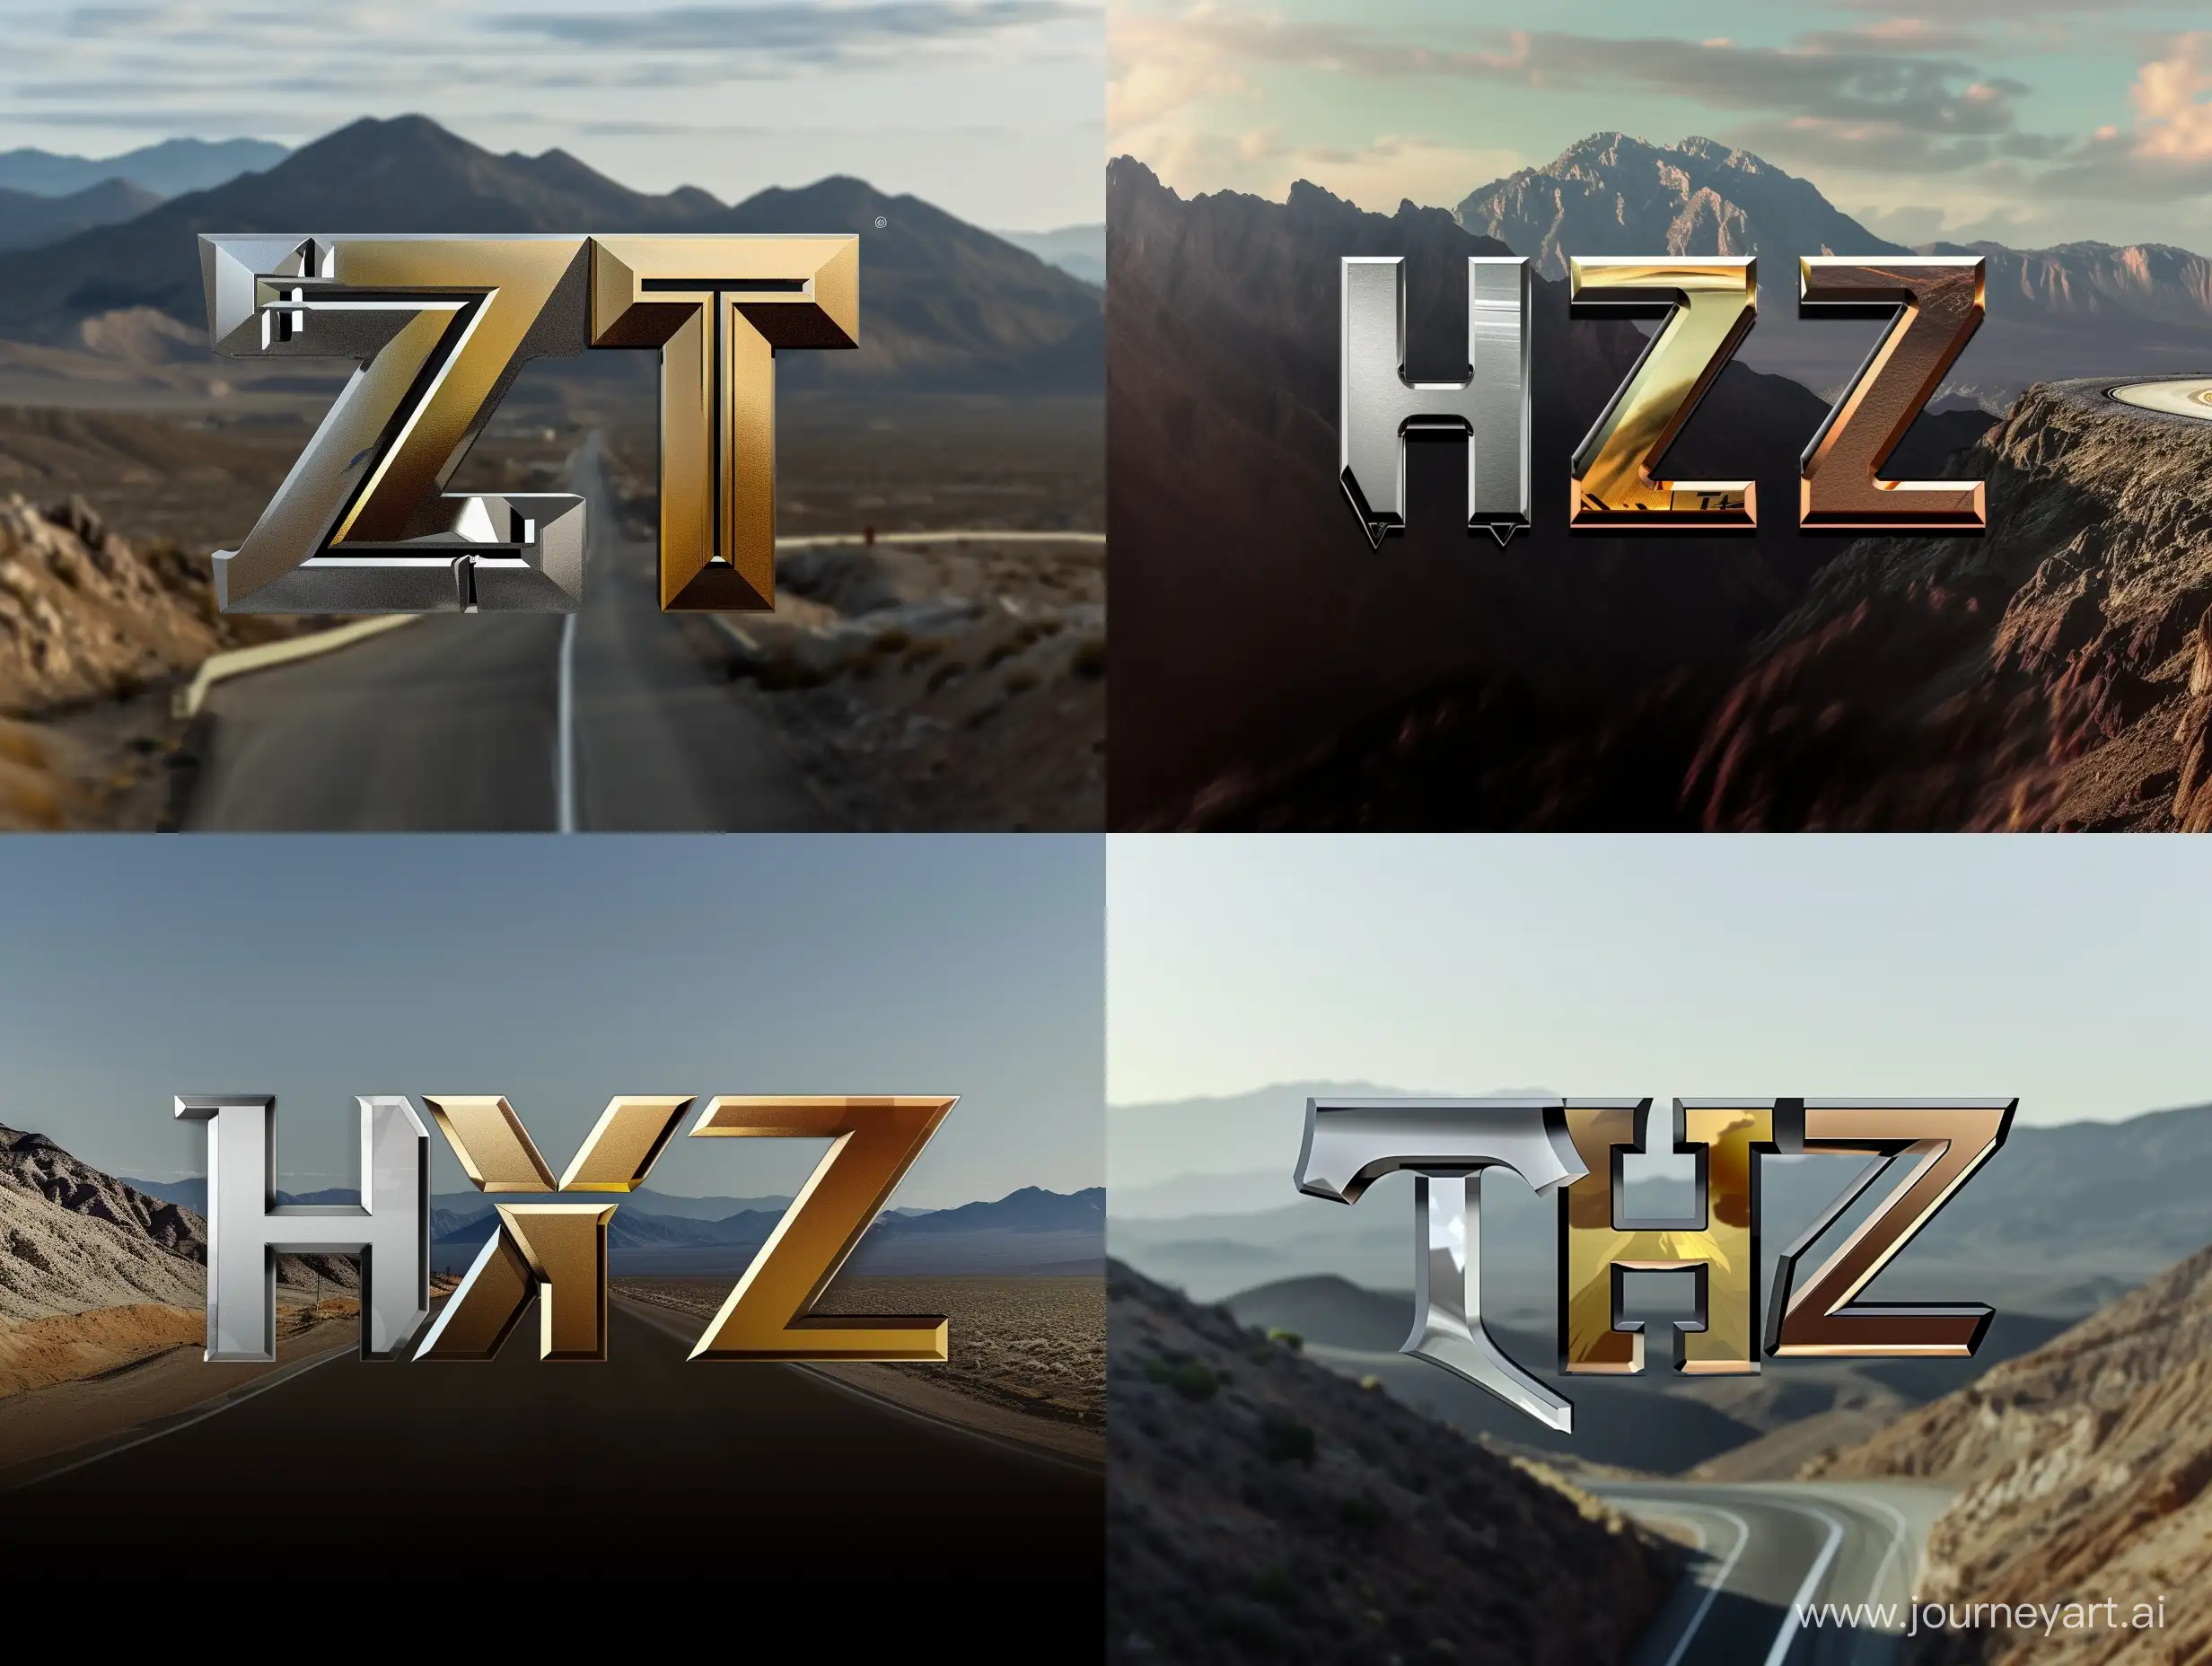 HighSpeed-Race-Logo-with-HZT-Letters-and-Mountainous-Backdrop